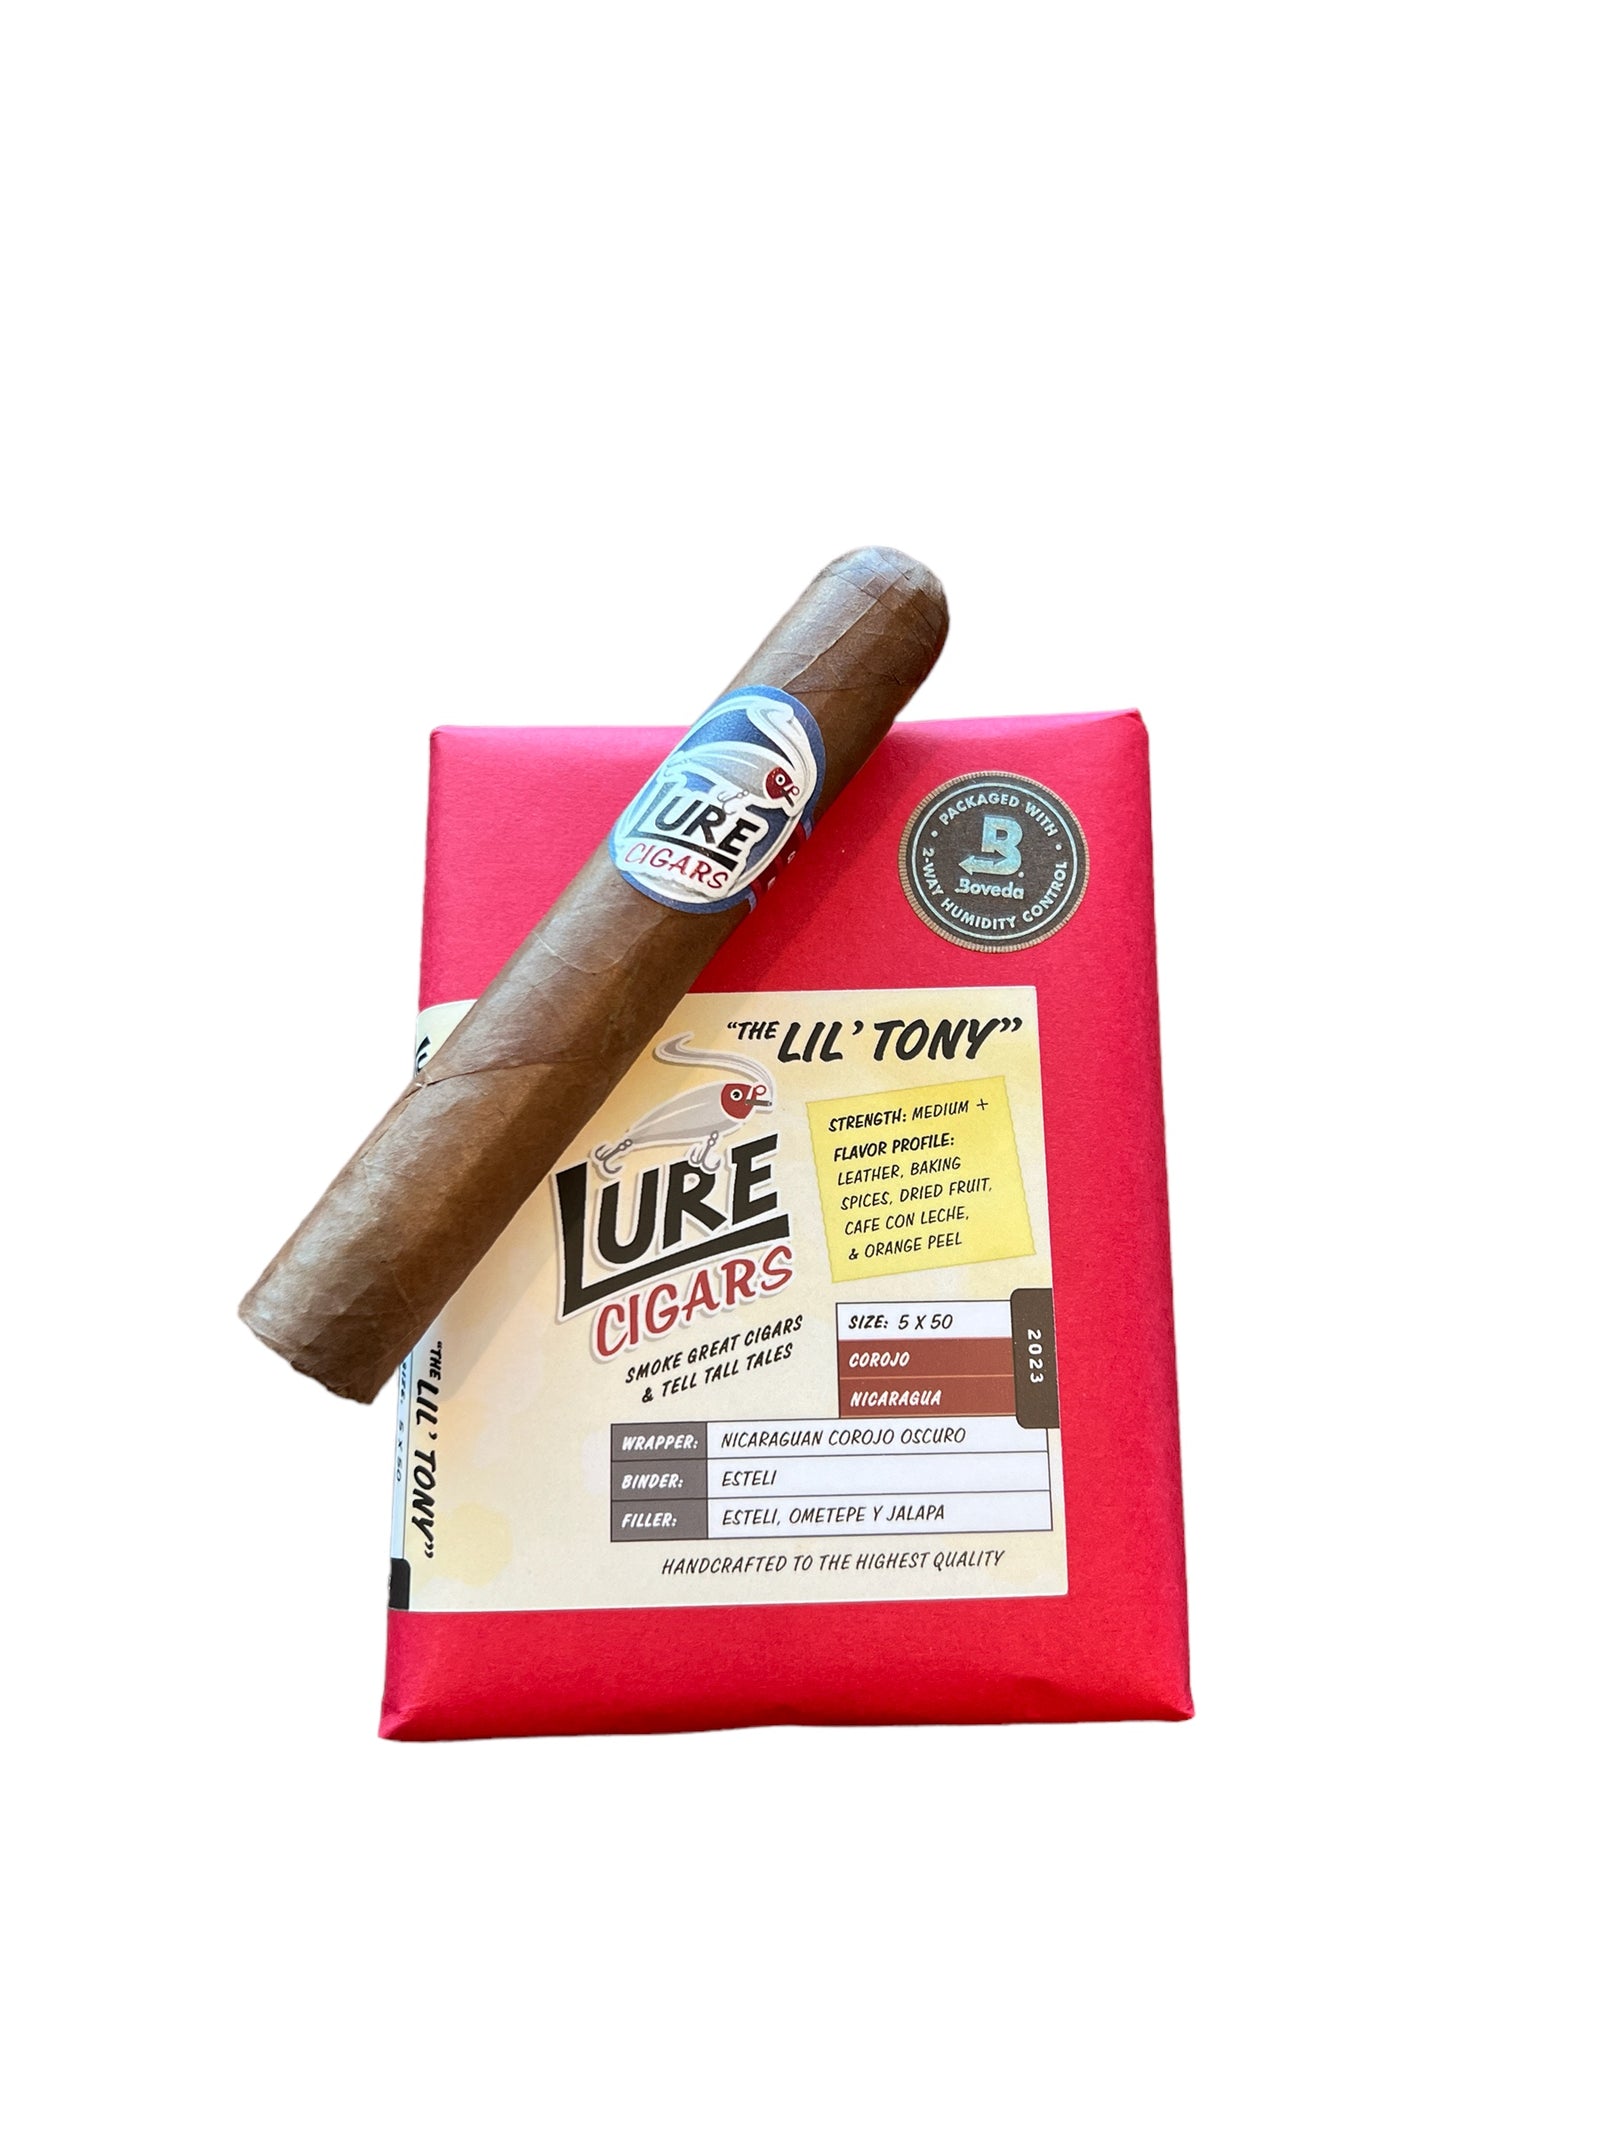 Lure Cigars - The Lil Tony